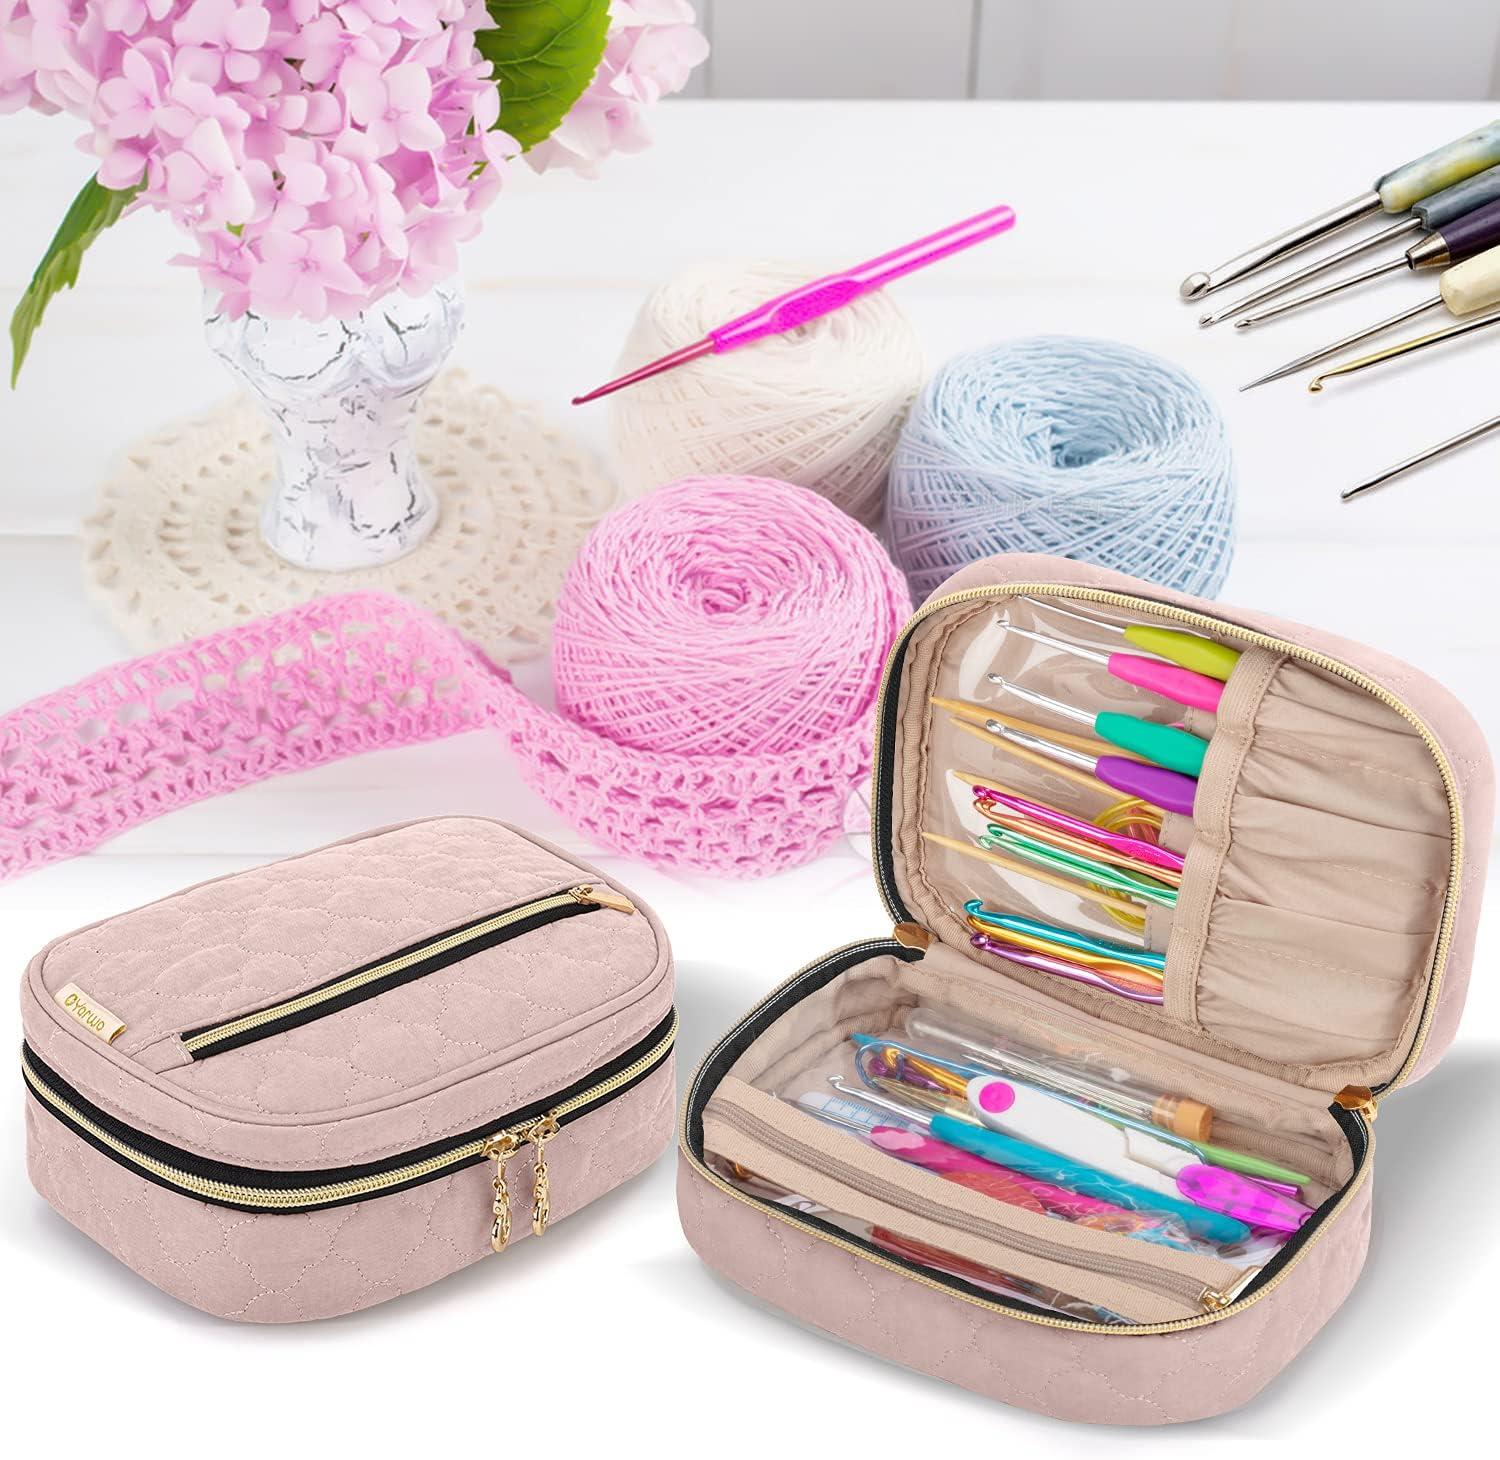  Yarwo Knitting Needles Case (up to 10.6), Crochet Hooks  Organizer with Double Handle for Circular Knitting Needles and Knitting  Accessories, Dusty Rose (Bag Only) : Arts, Crafts & Sewing